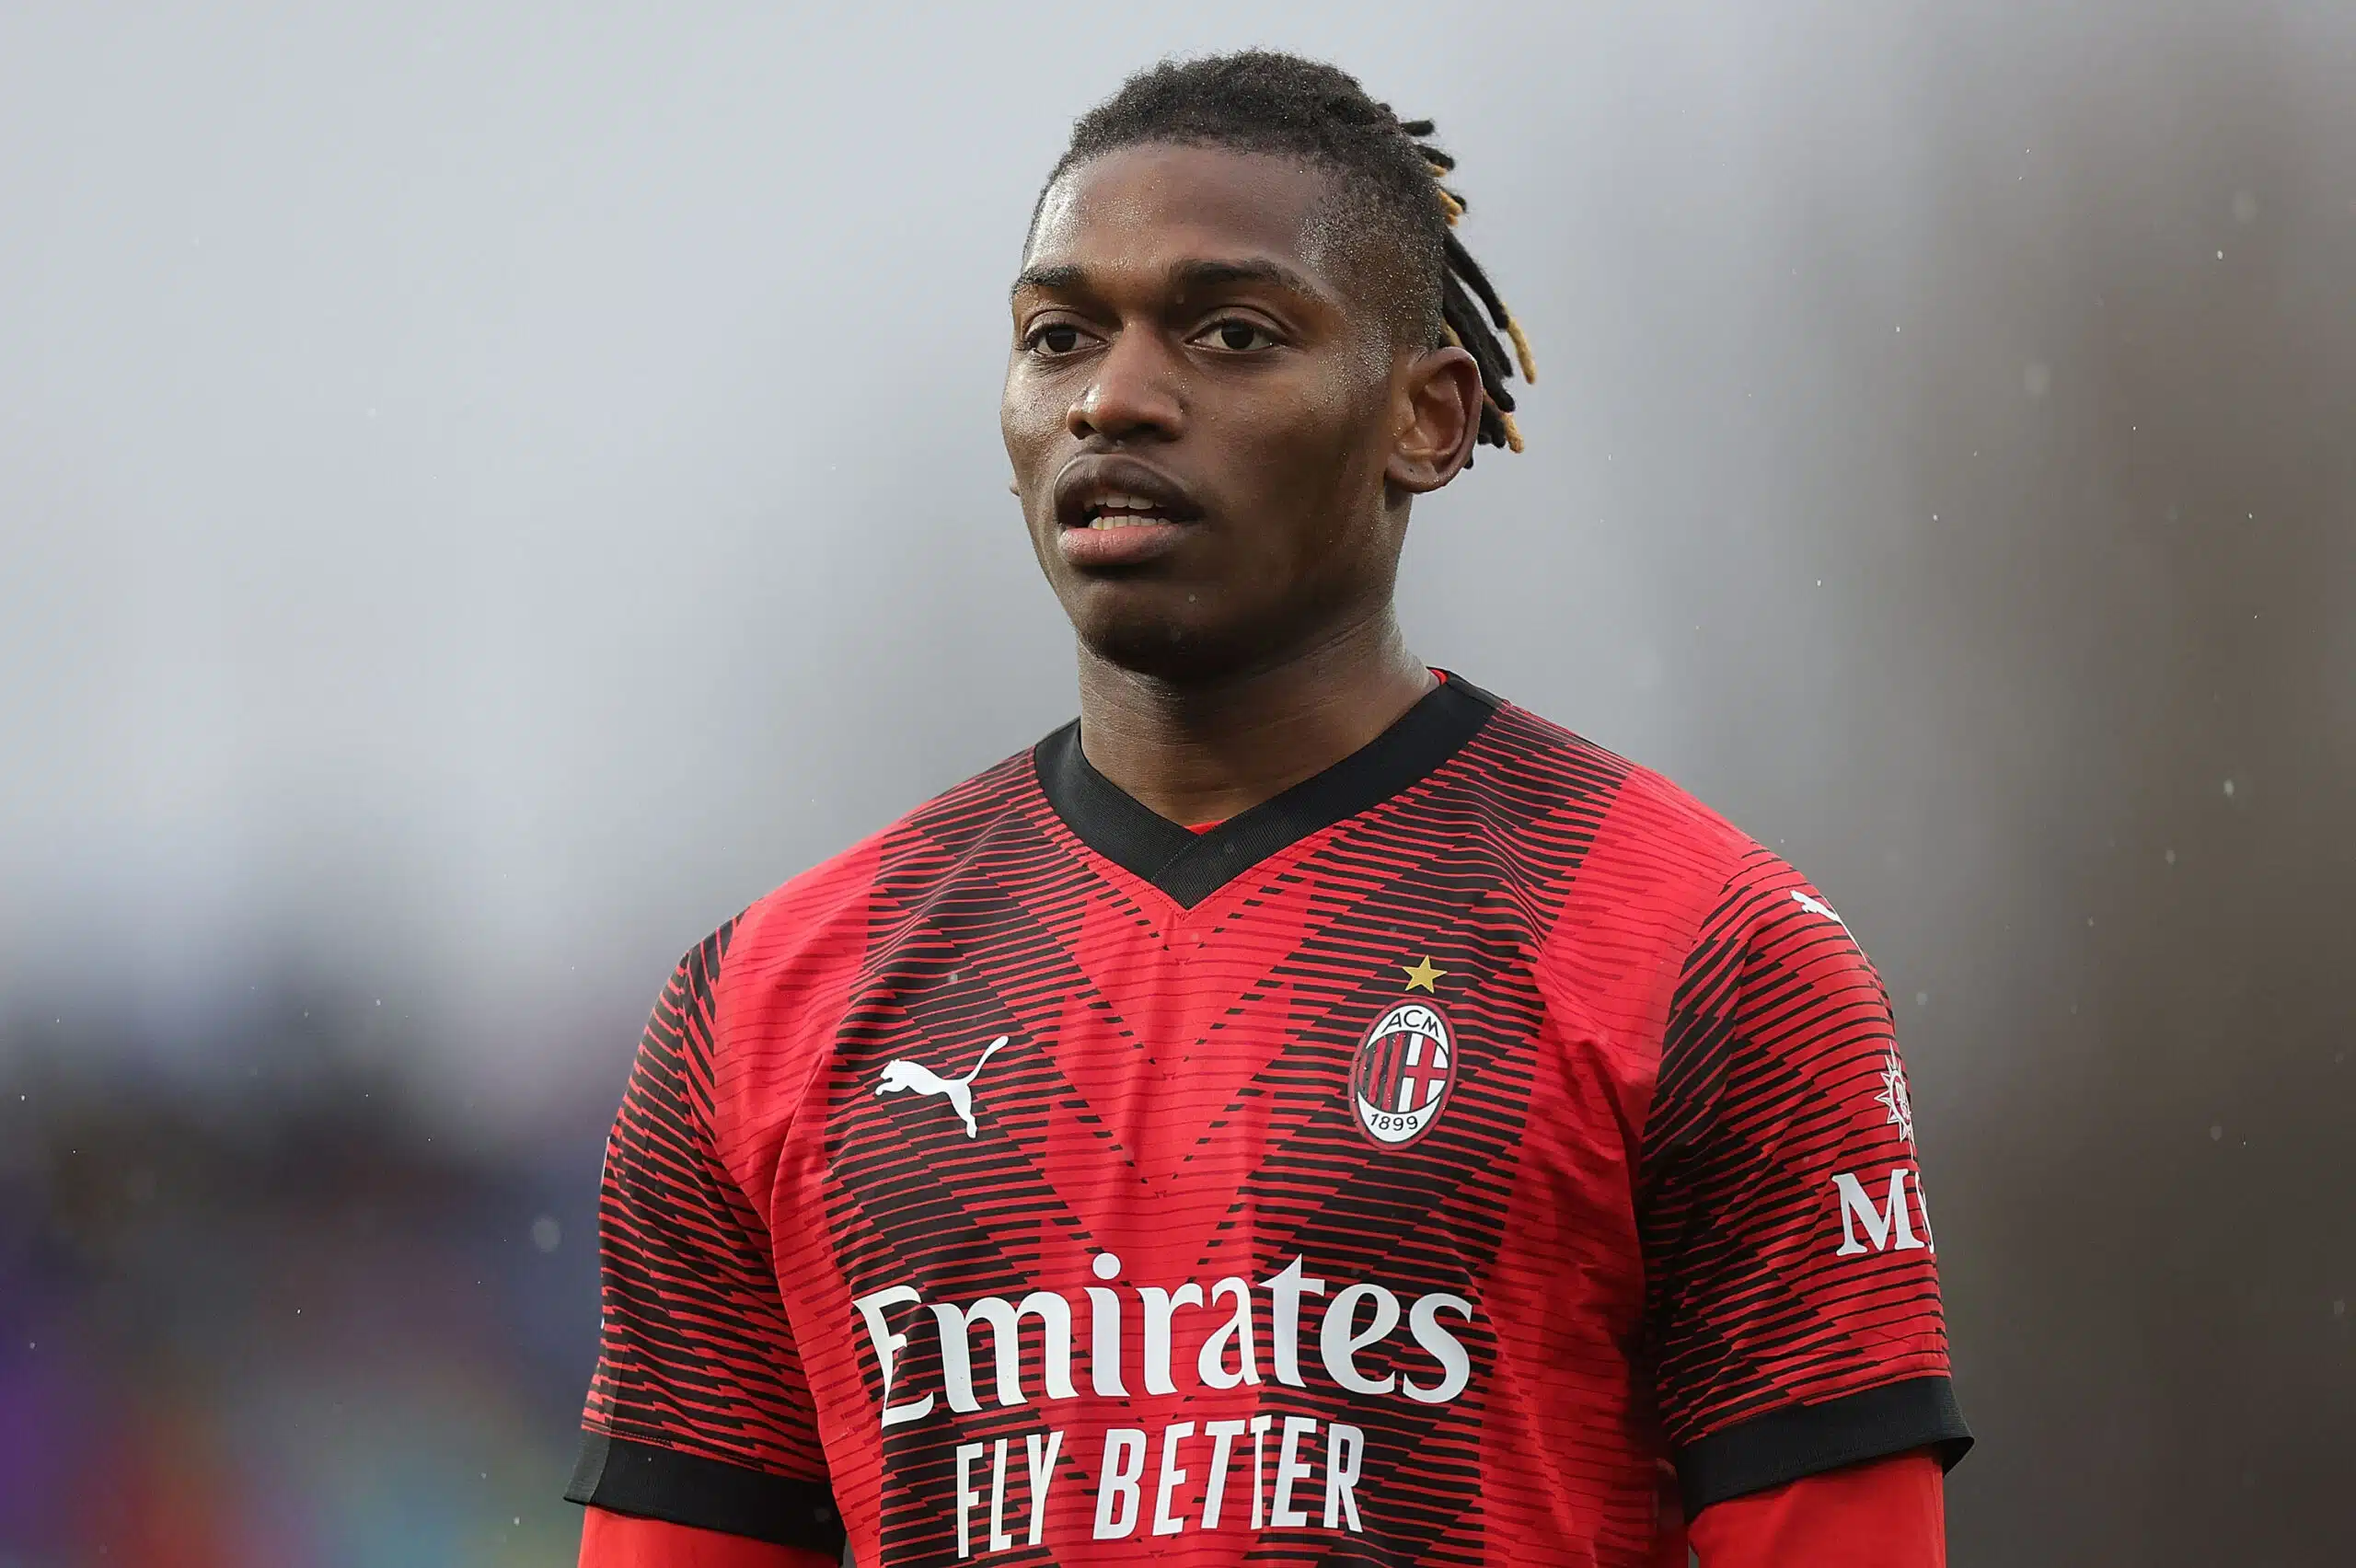 Rafael Leao has been shortlisted by PSG for the summer, when they might have to replace Kylian Mbappé. There’s a €175M release clause in his contract.